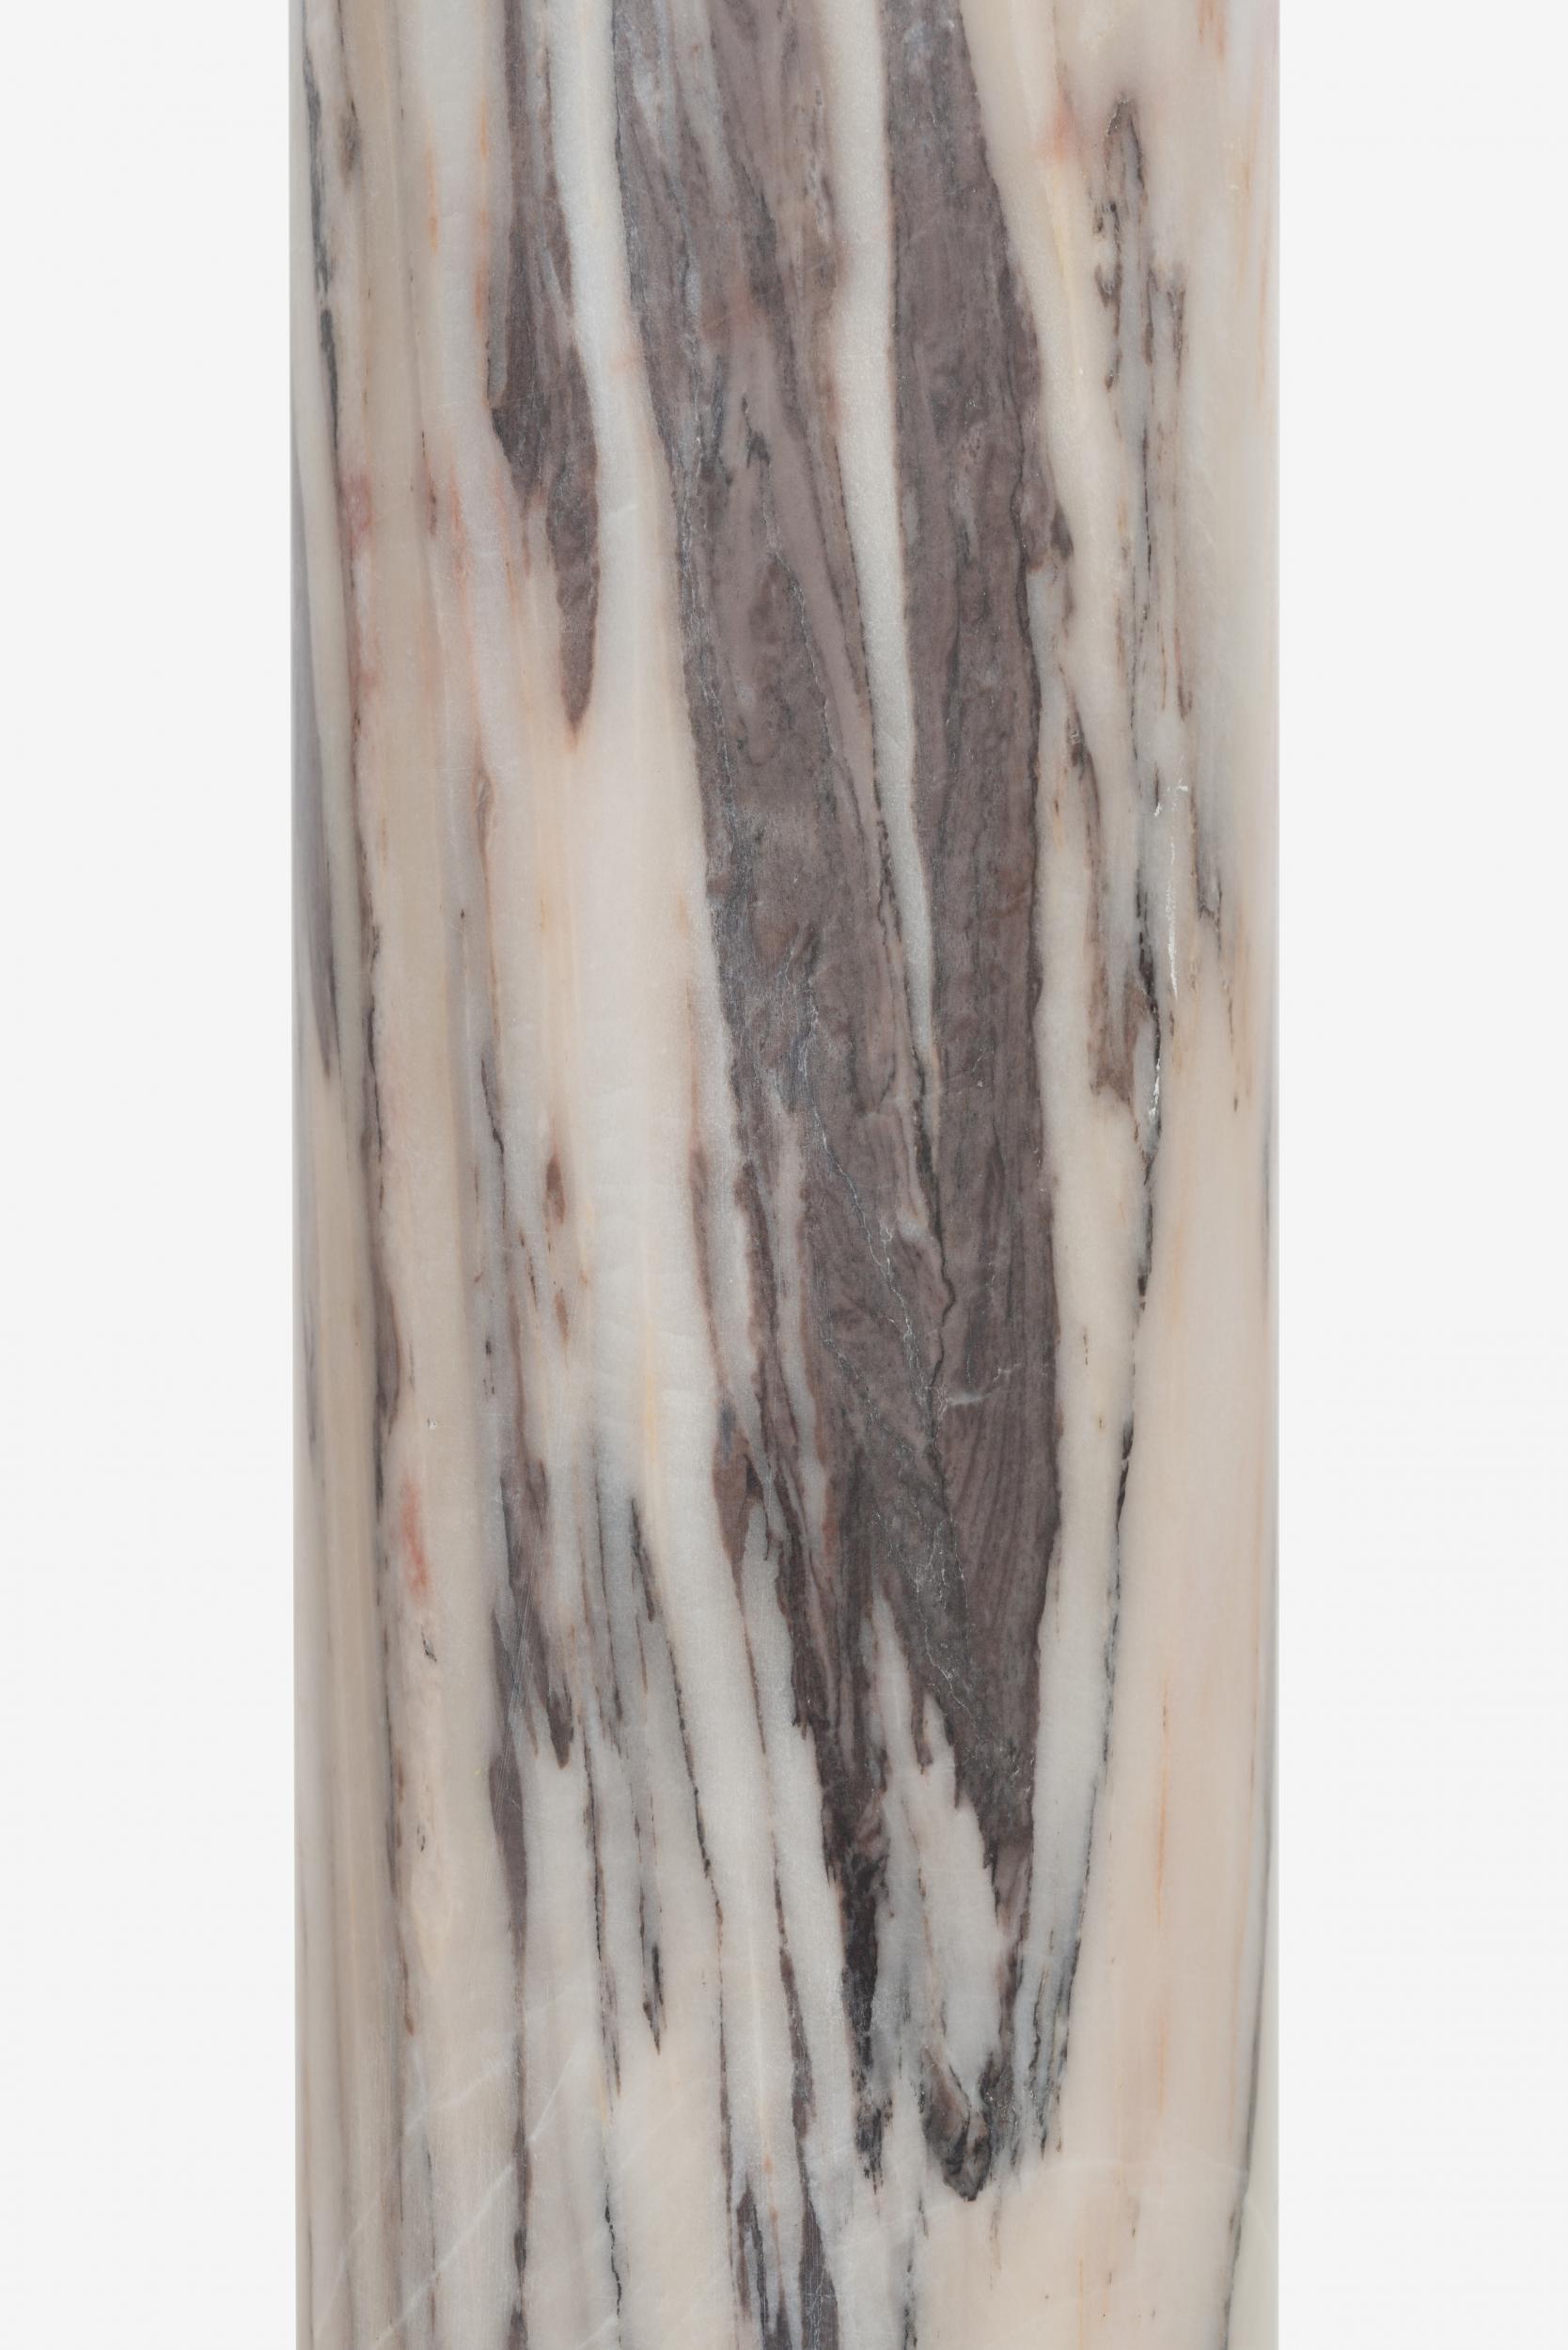 Mid-20th Century Pair of Marble Architectural Display Columns in Calacatta Pink Quarried in Italy For Sale